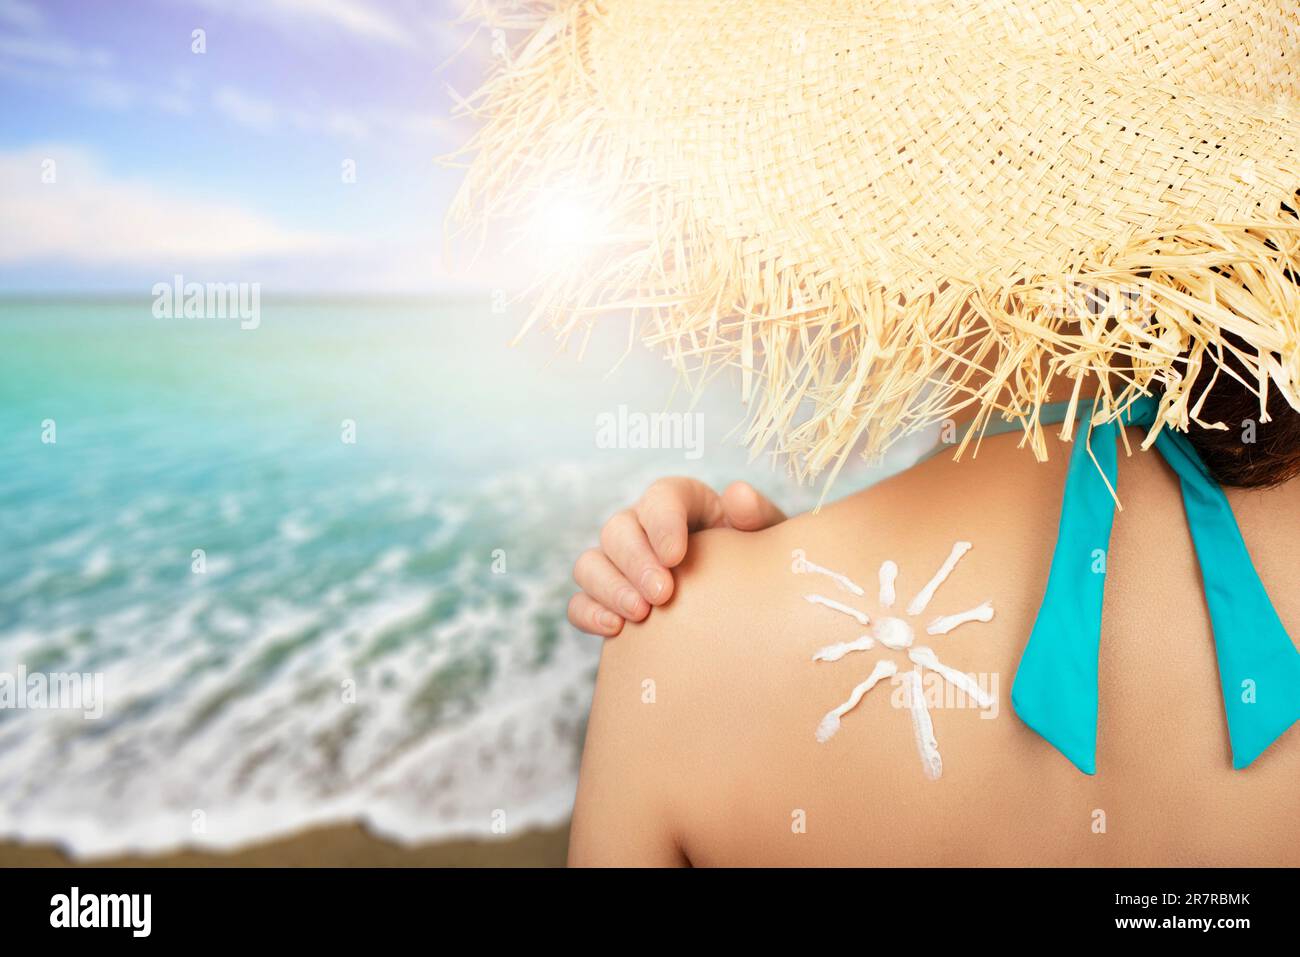 Middle aged caucasian female model applying sunscreen. Stock Photo